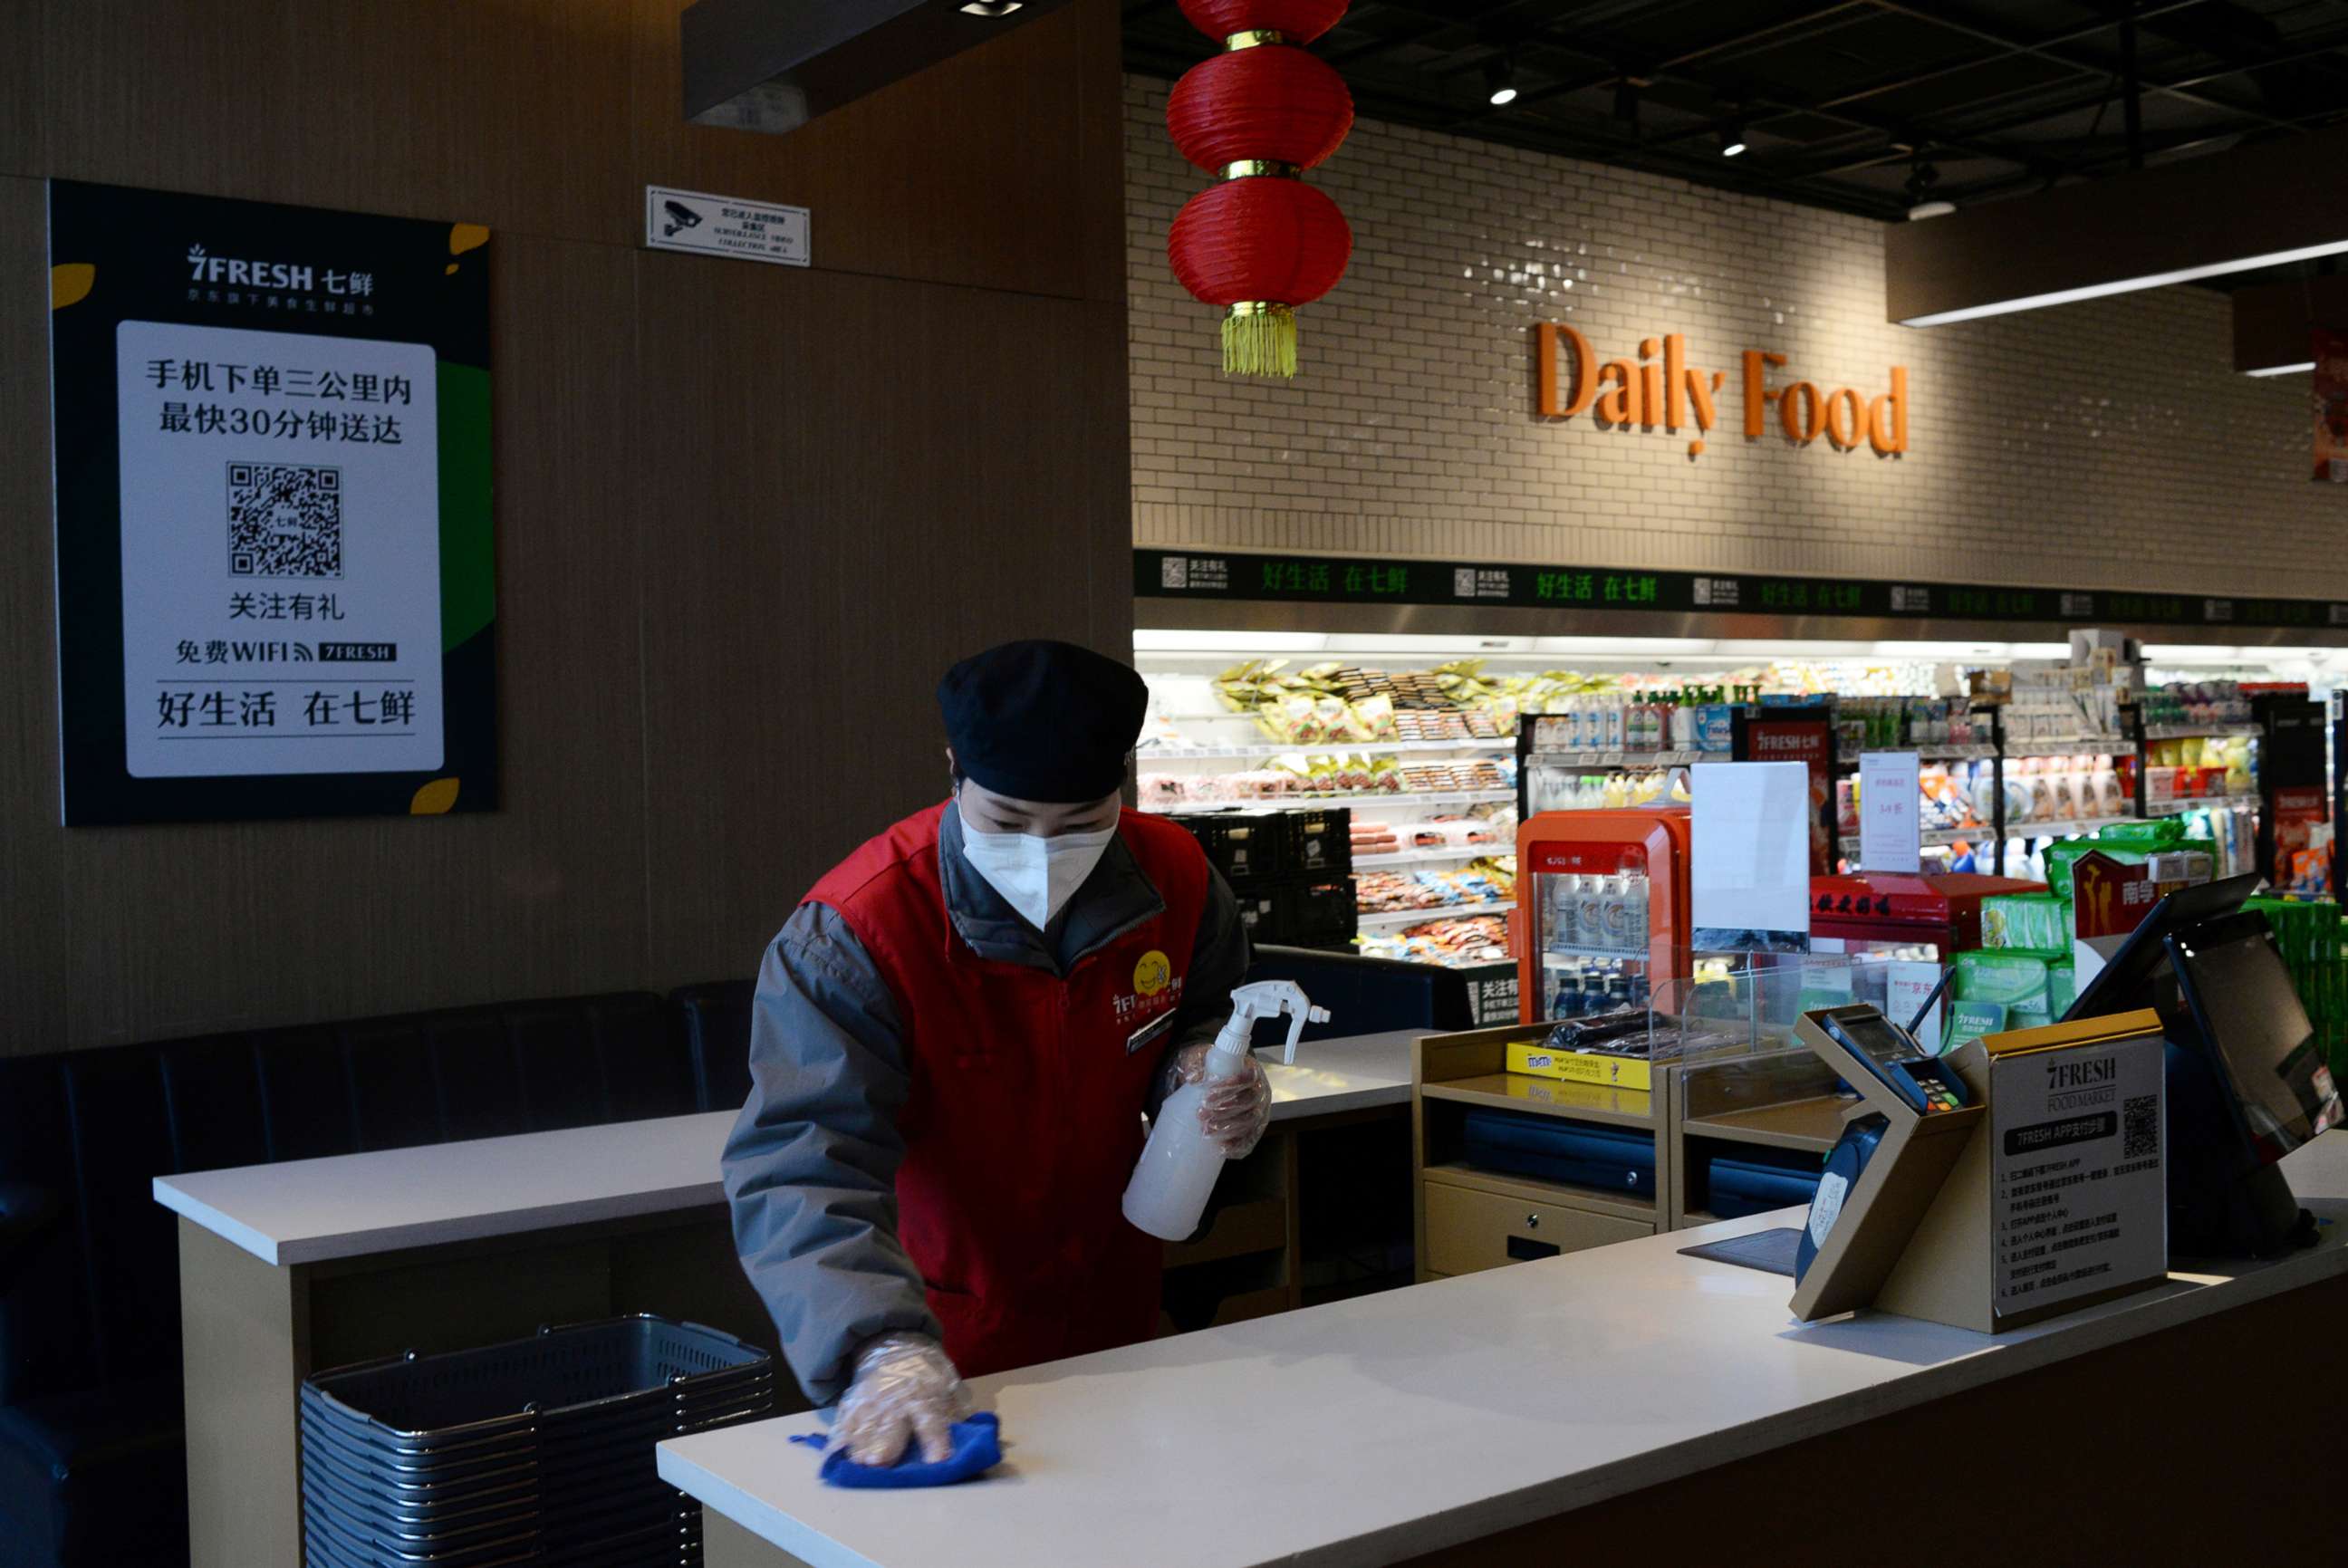 PHOTO: A staff member cleans a check counter at a JD.com's 7Fresh chain before the store opens, during an outbreak of the novel coronavirus, in Yizhuang town, Beijing, Feb. 8, 2020.